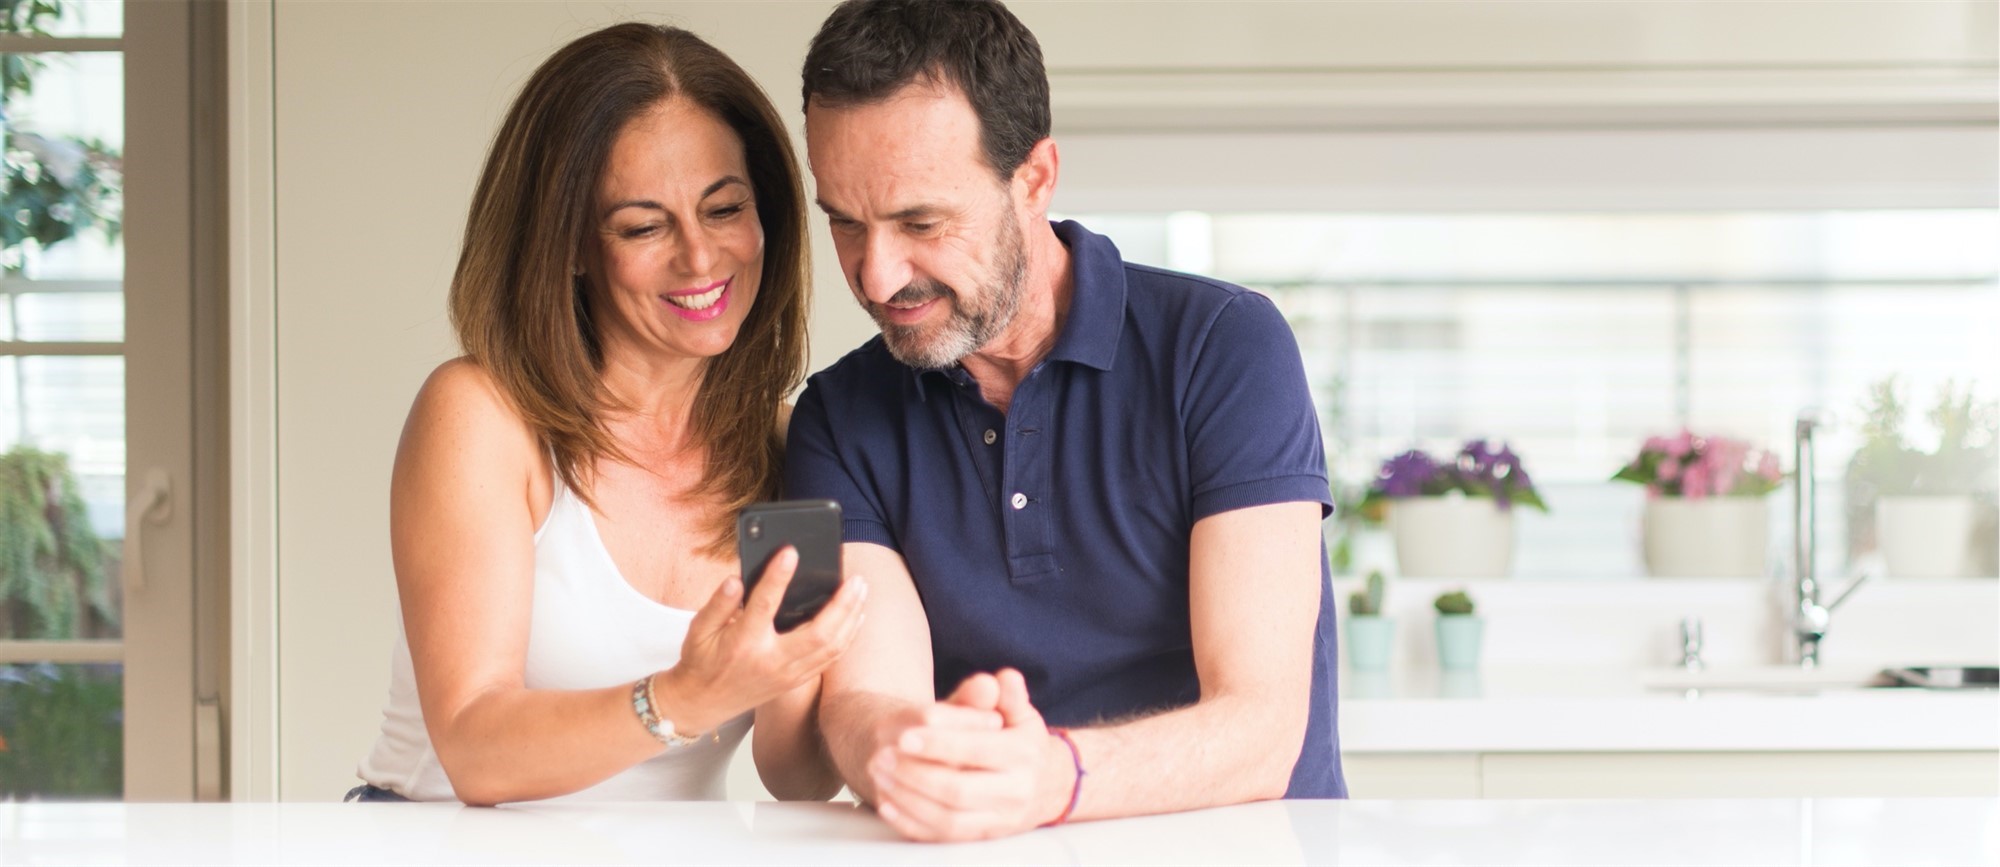 Smiling couple looking at mobile phone